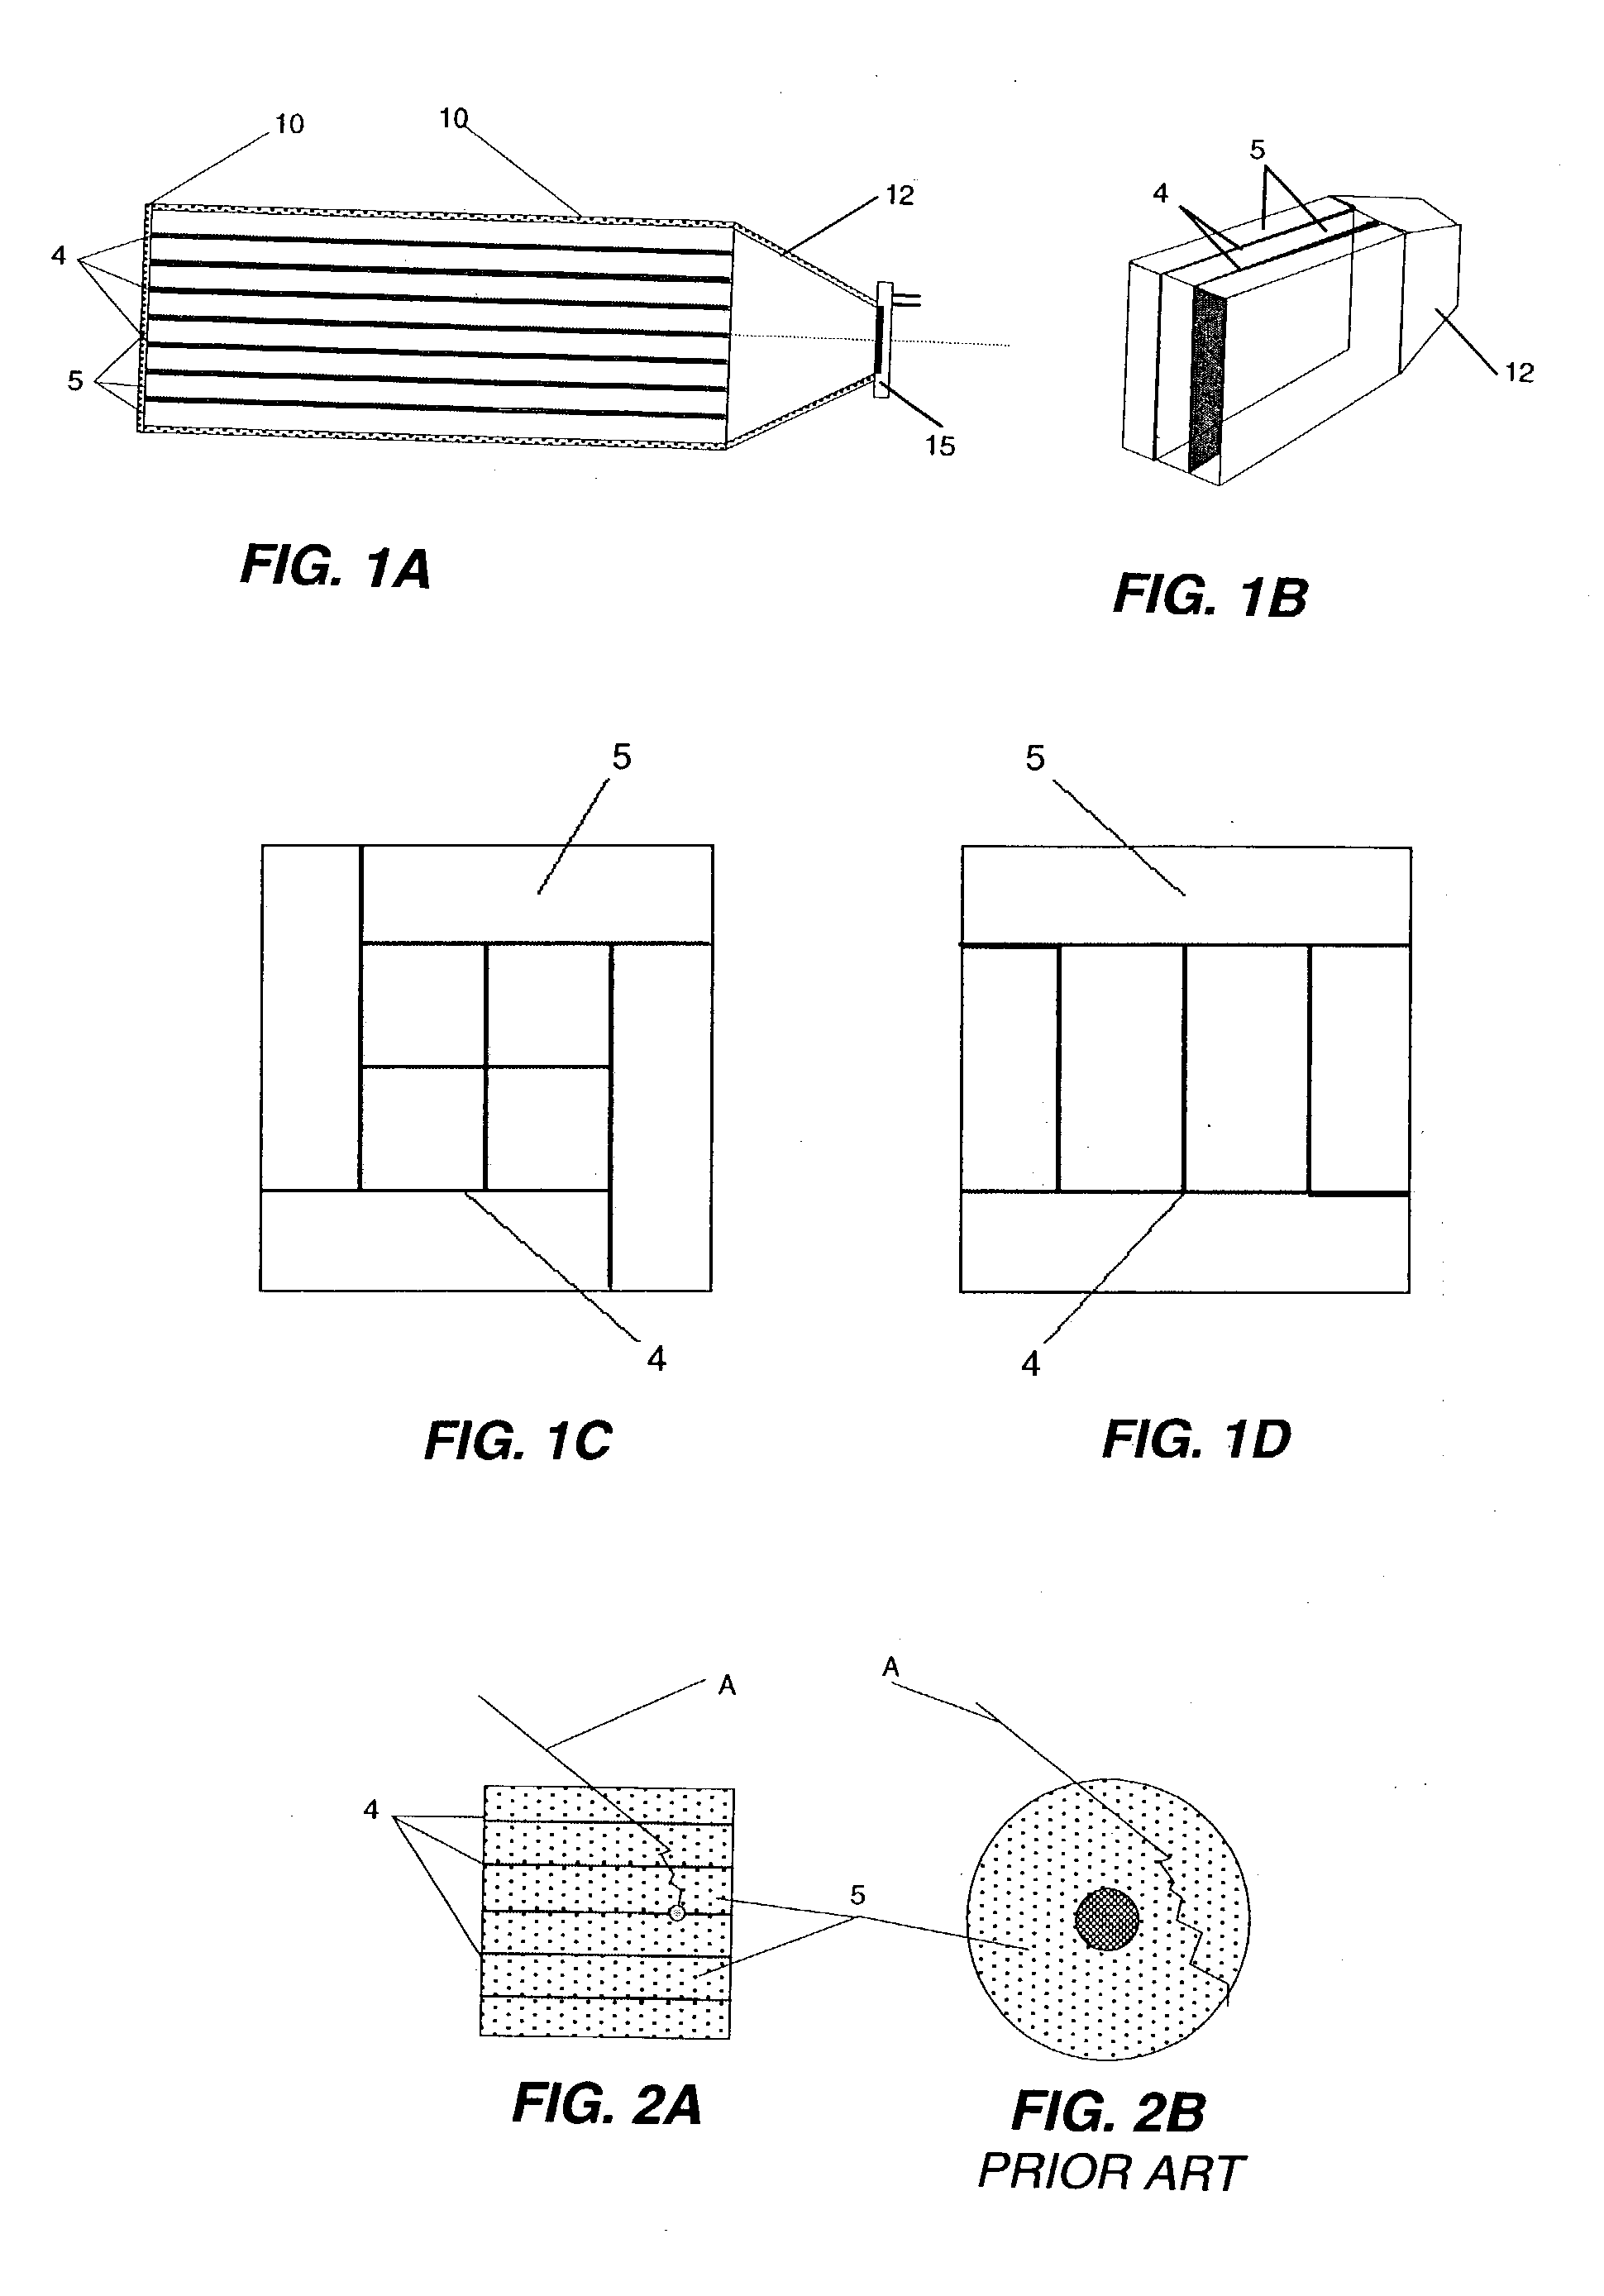 Neutron detector with layered thermal-neutron scintillator and dual function light guide and thermalizing media